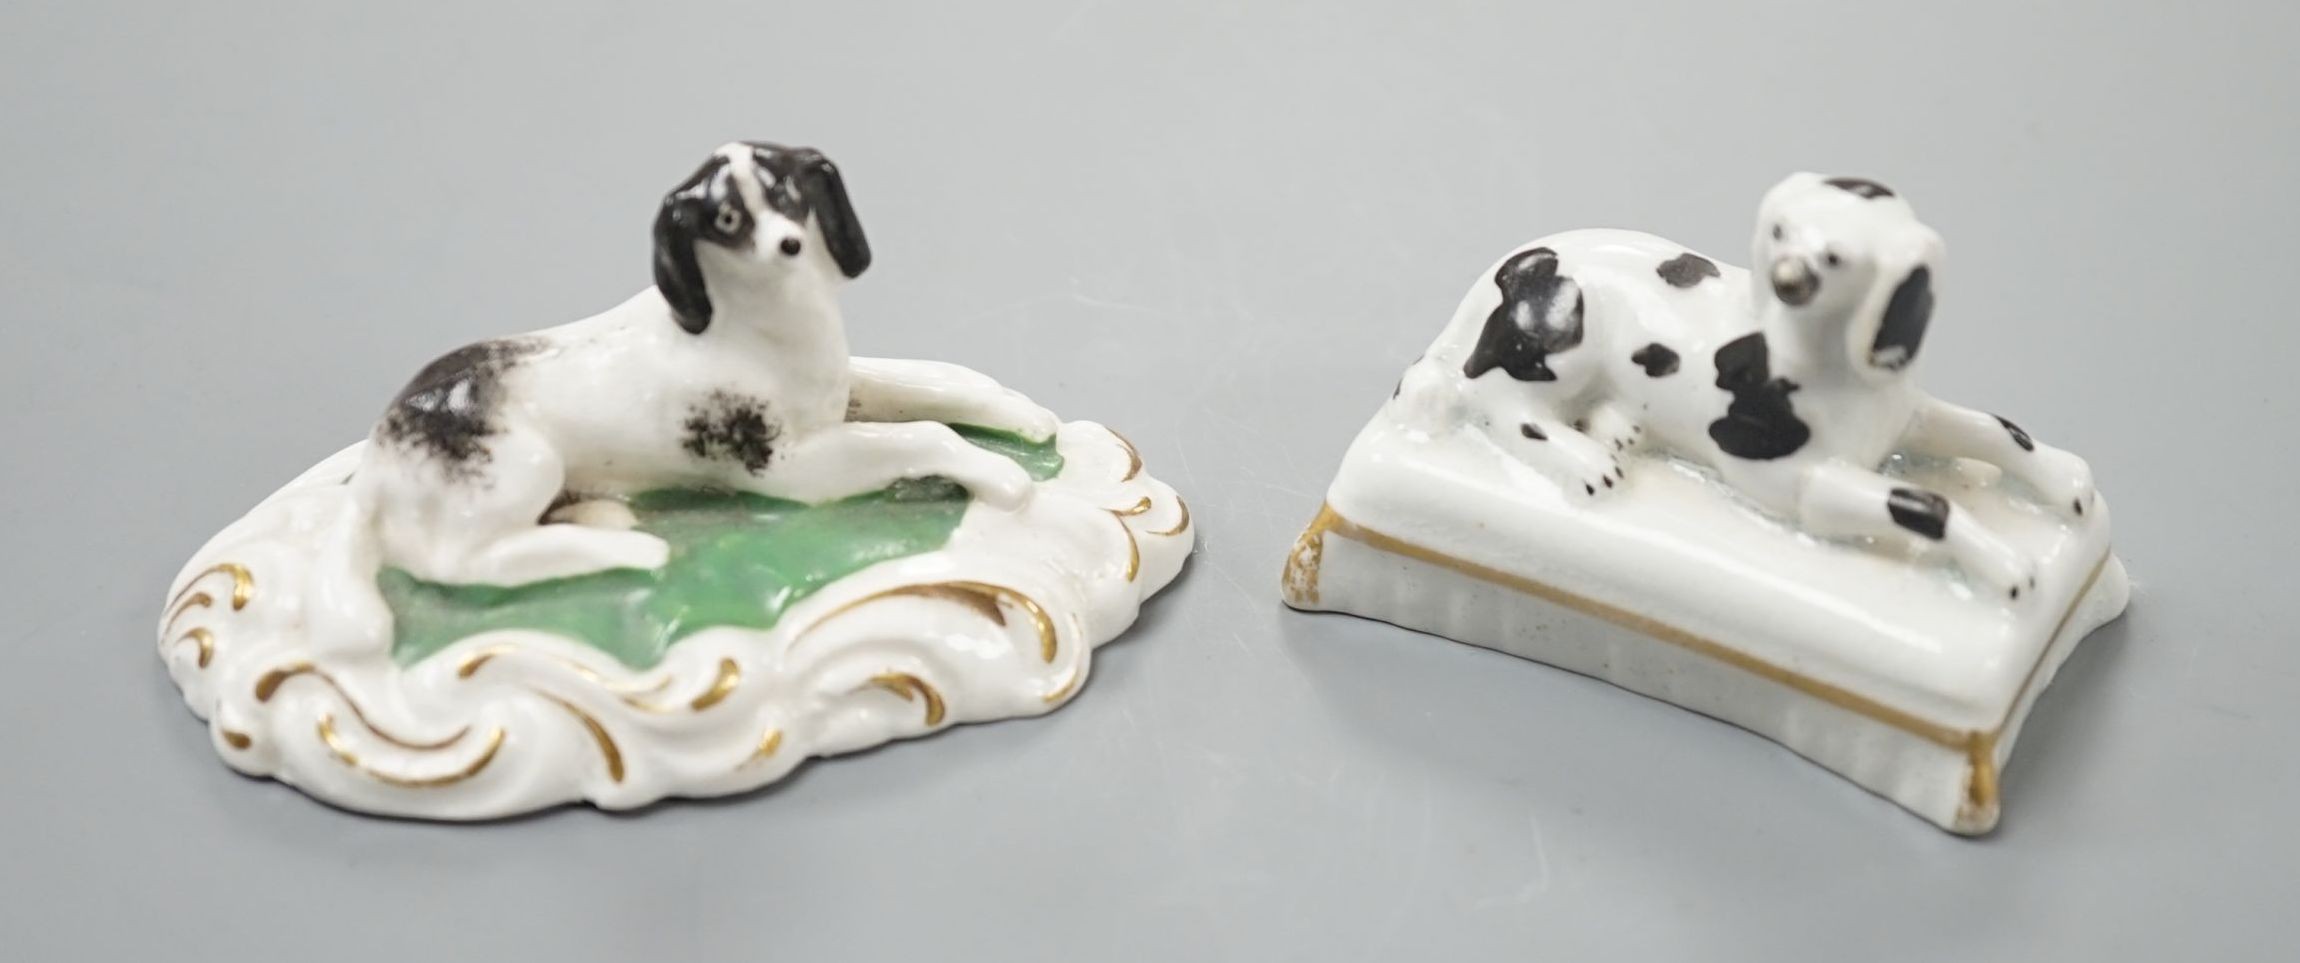 Two Staffordshire porcelain models of recumbent king Charles spaniel‘s, c.1835-50, largest 8.2 cm long, Cf. Dennis G.Rice Dogs in English porcelain, colour plate 146., Provenance: Dennis G.Rice collection